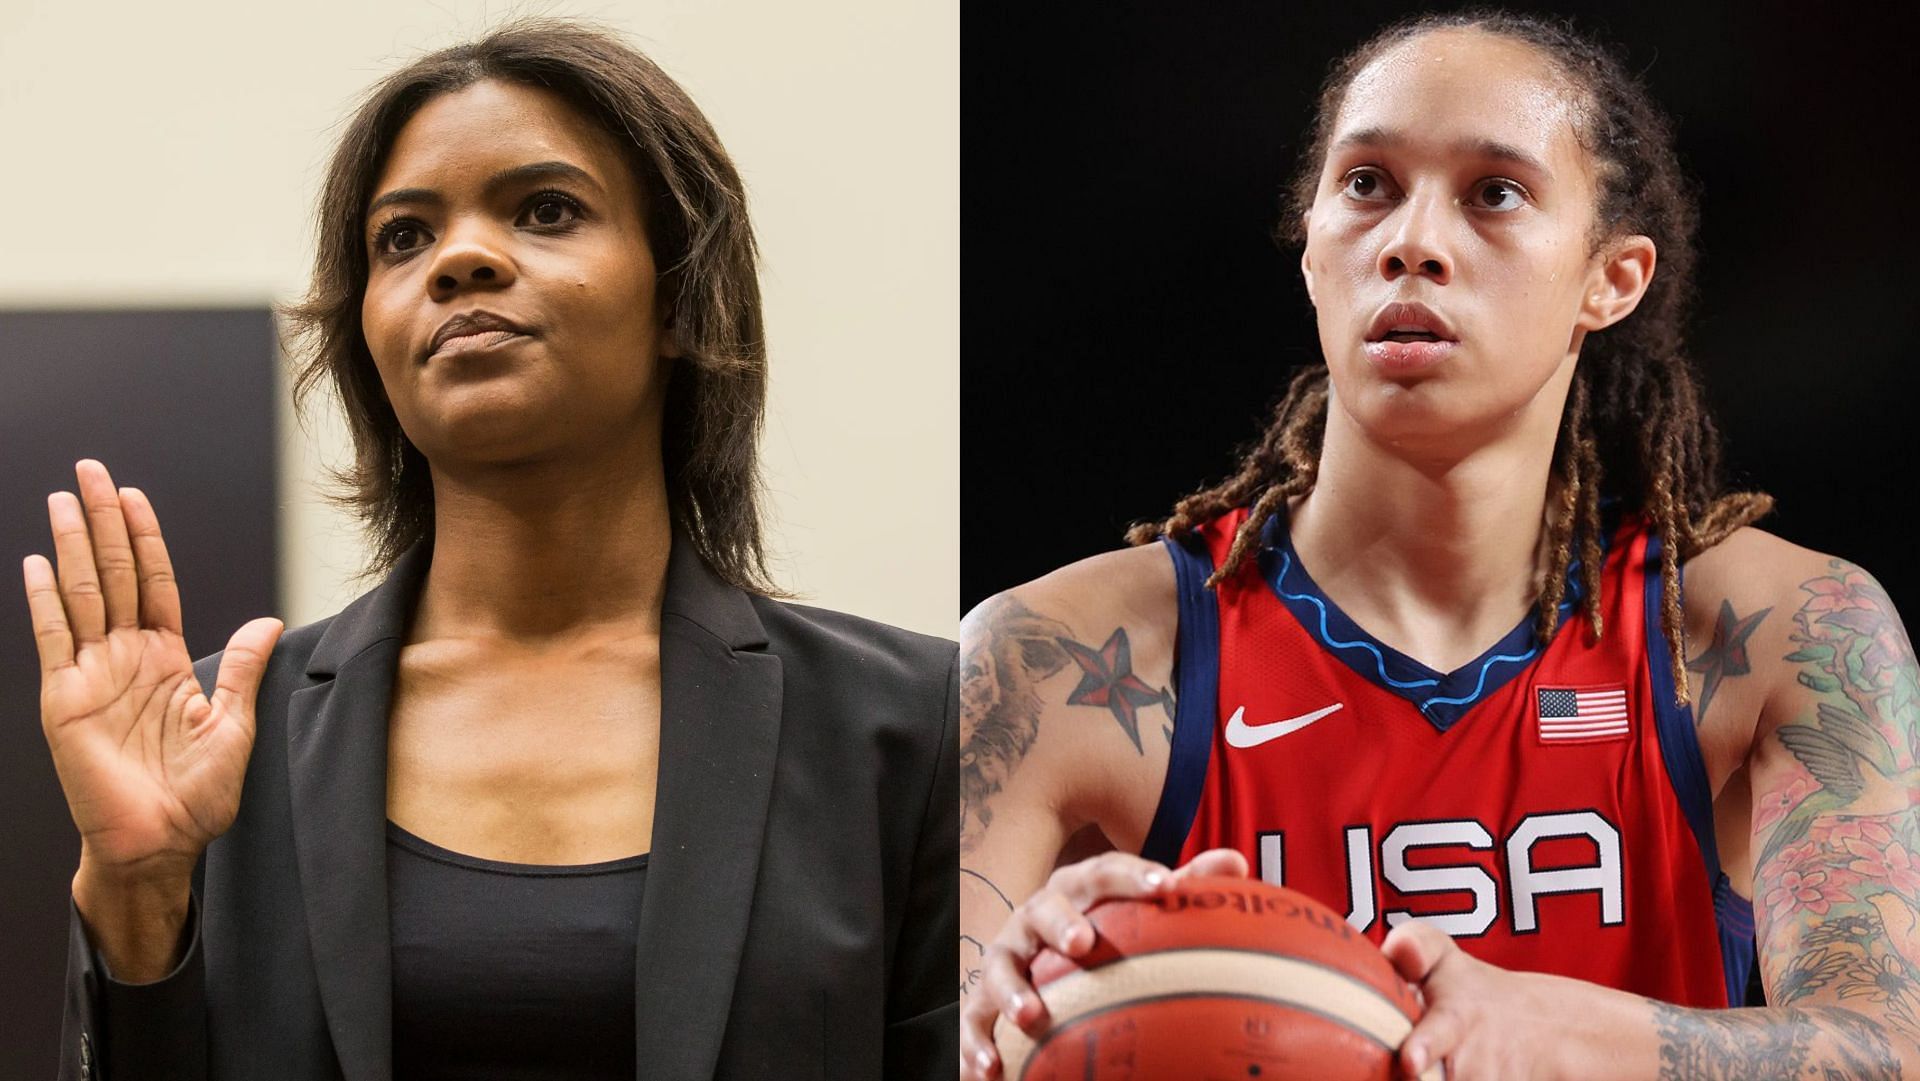 Brittney Griner was swapped for infamous arms dealer, Viktor Bout. (Photos via Getty Images)